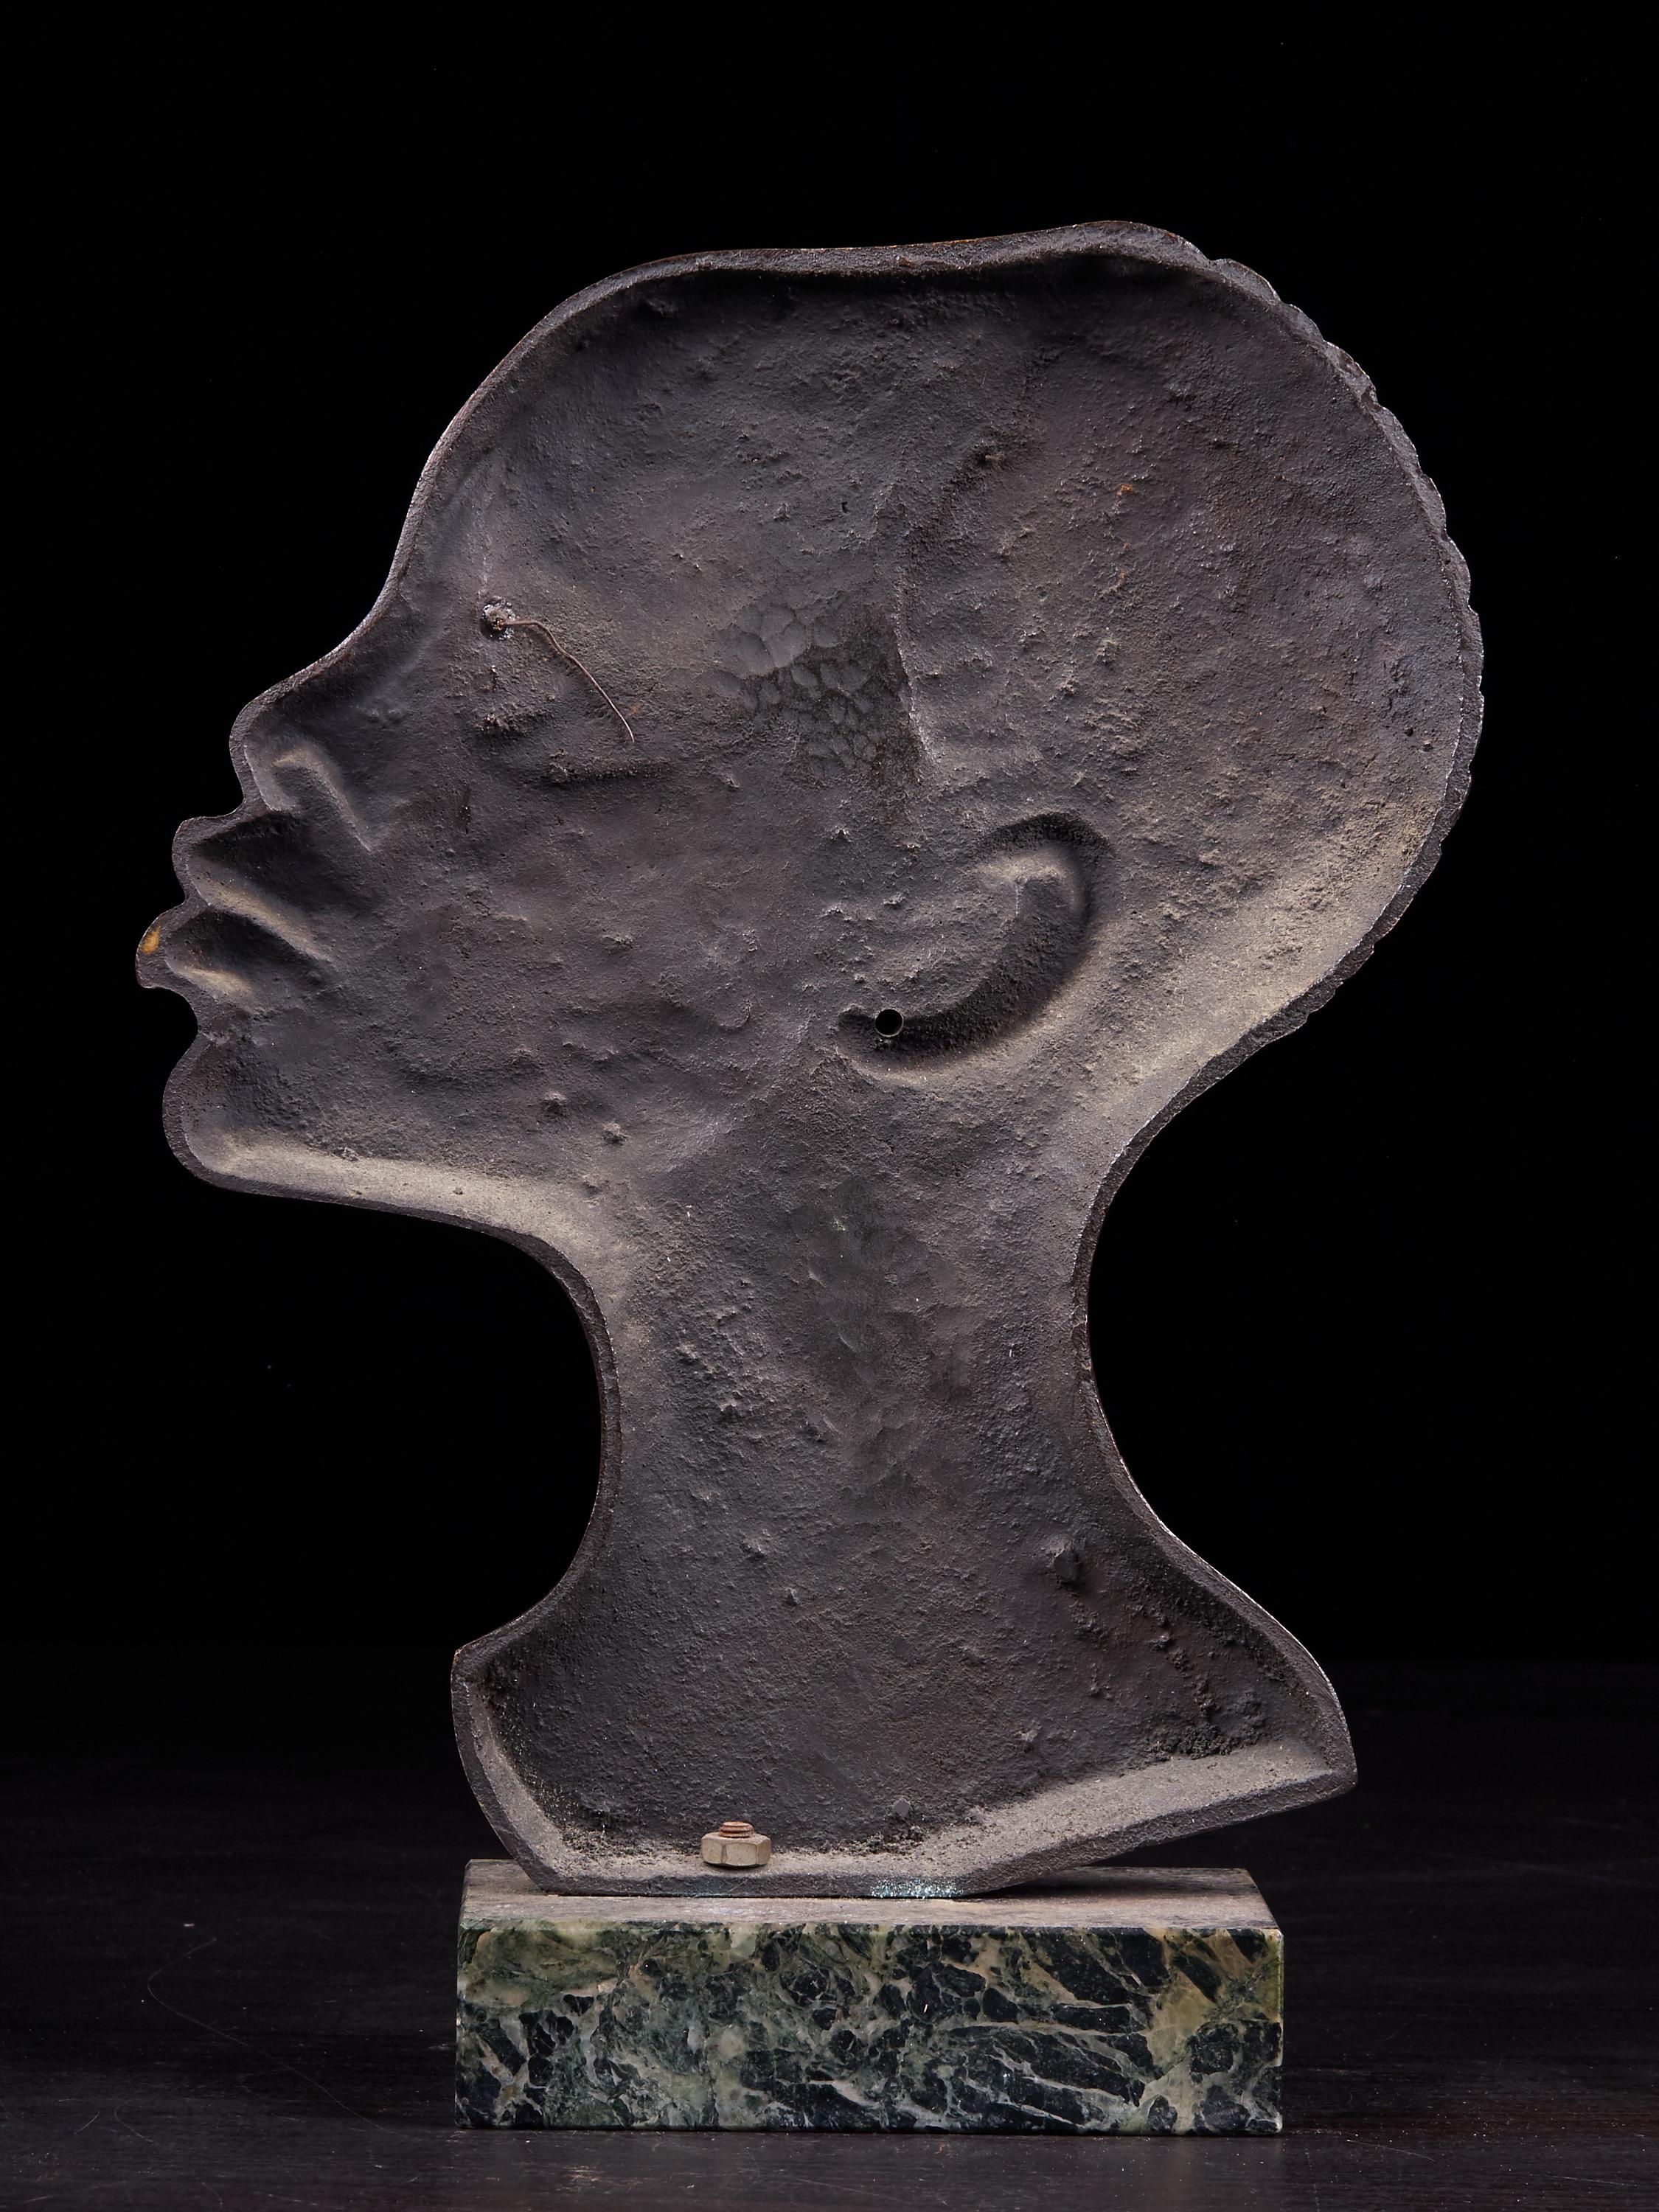 Striking moulded matte copper alloy profile of an African figure's head with relief hair and shiny lips. This untagged item is set on a base of blue green turquoise stone.